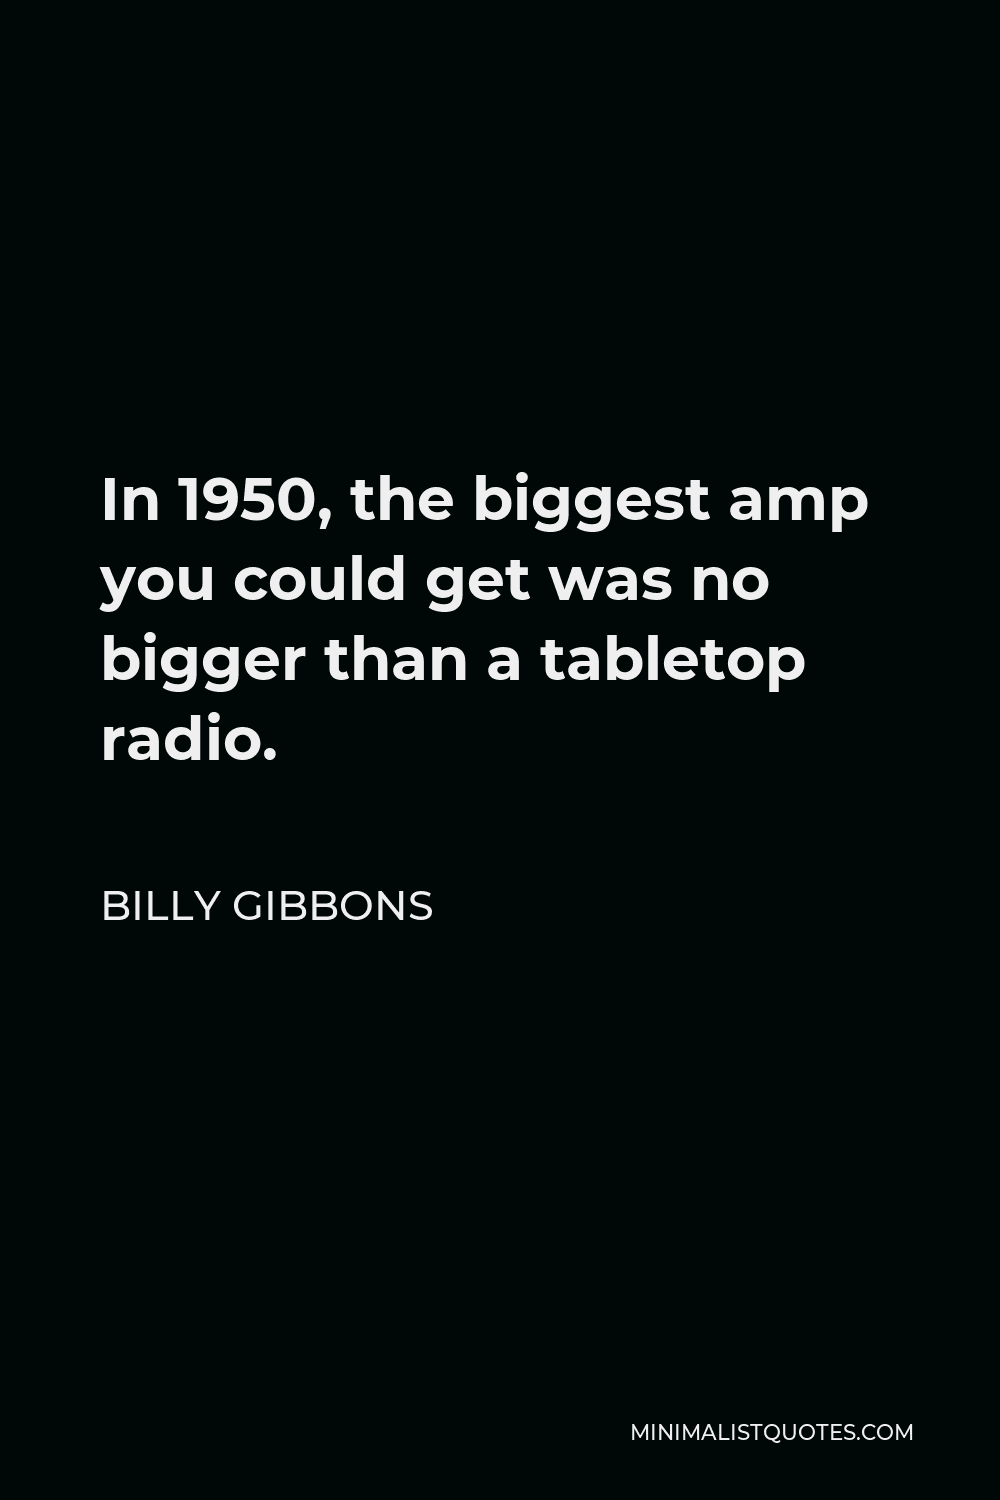 Billy Gibbons Quote - In 1950, the biggest amp you could get was no bigger than a tabletop radio.